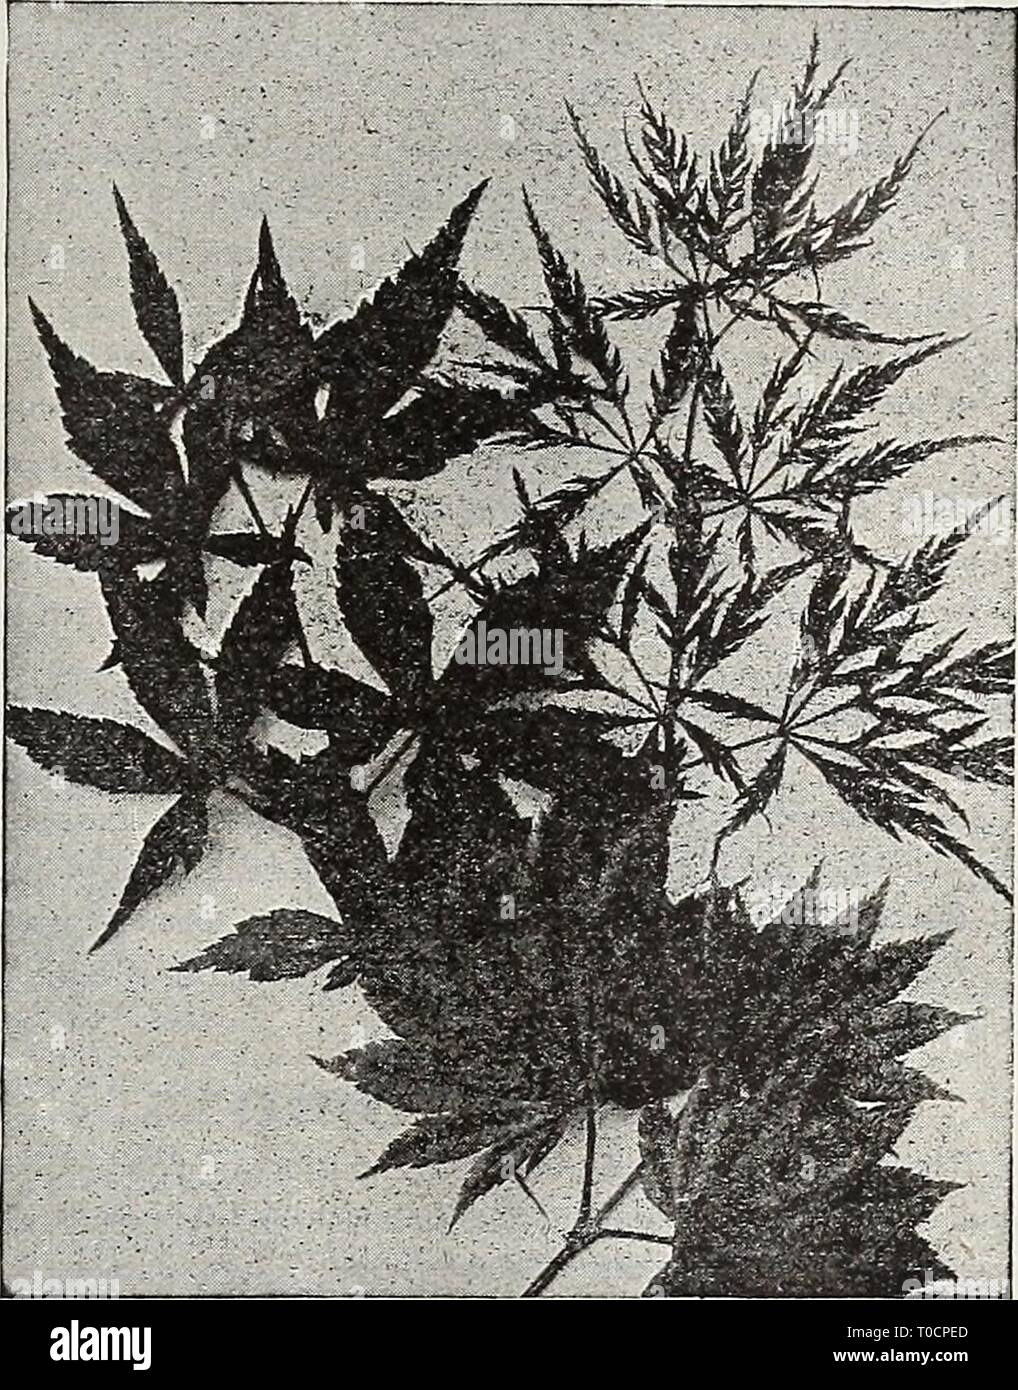 Dreer's garden book 1918 (1918) Dreer's garden book 1918 dreersgardenbook1918henr Year: 1918  jHEWADREiR jjAMg^WCROji HARDY5HRU6S jJ111 225 Ligustrum Ibota. A graceful hardy Privet from Japan, of spread- ing habit, bearing small, fragrant white flowers in June and July. 30 cts. each. 3 kegelianum. A handsome Japanese Privet, with spreading branches ancV'dark green foliage, contrasting well with the racemes of fragrant white flowers in summer; elegant and graceful as an isolated 'specimen or for an informal hedge. 30 cts. each. — Ovalifolium Aureum ( Golden-leaved Privet). A beautiful golden va Stock Photo